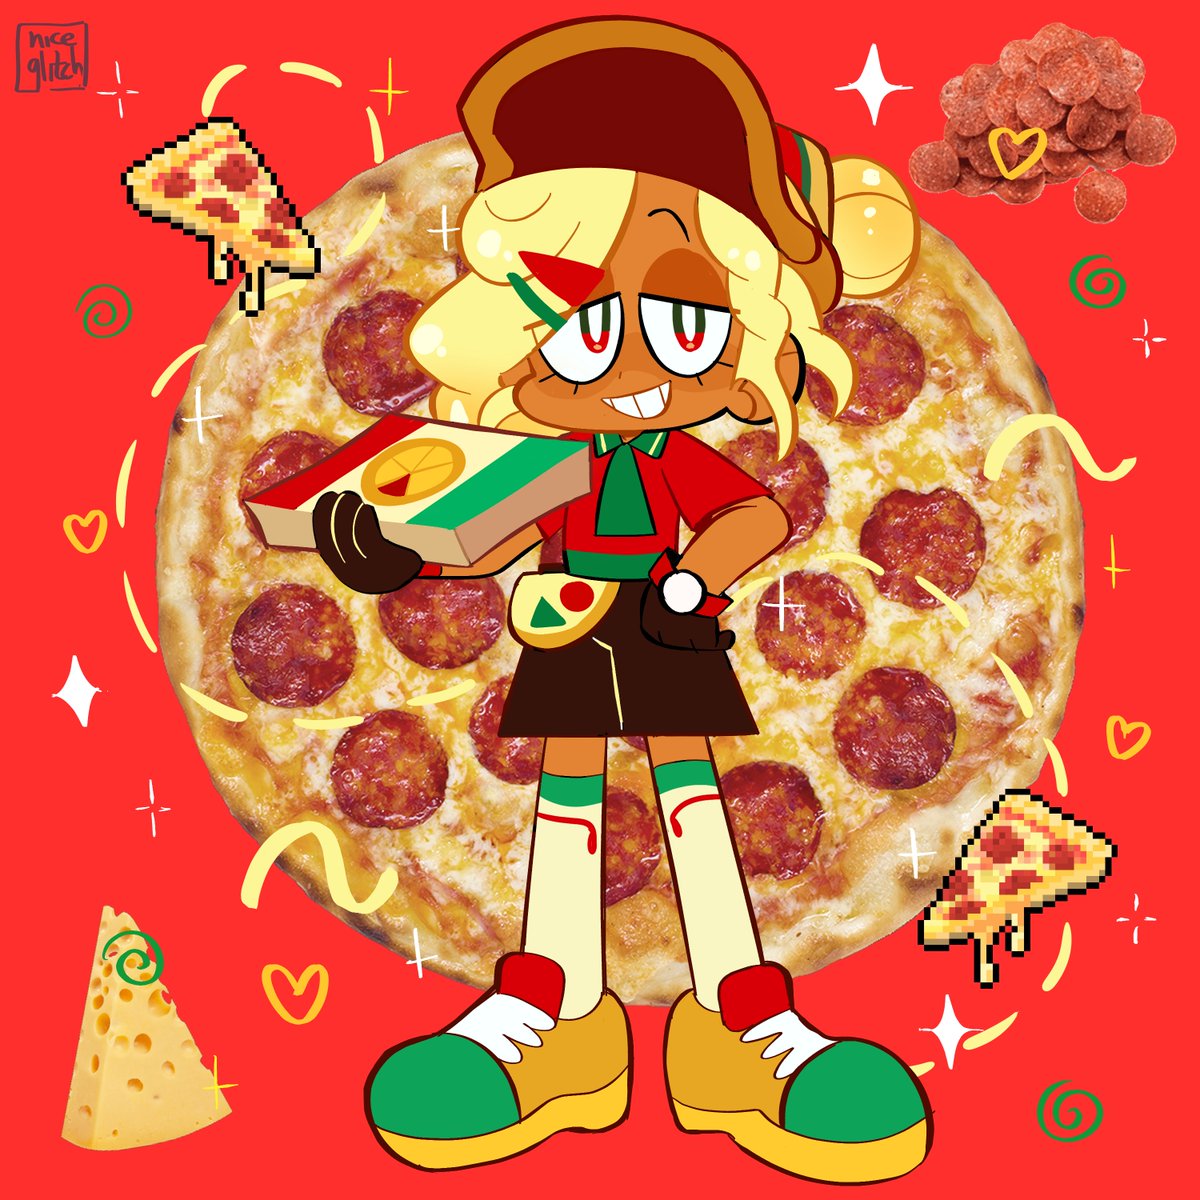 「pizza delivery🍕✨ #cookierun 」|;𝓷𝓲𝓬𝓮𝓰𝓵𝓲𝓽𝓬𝓱 💖のイラスト